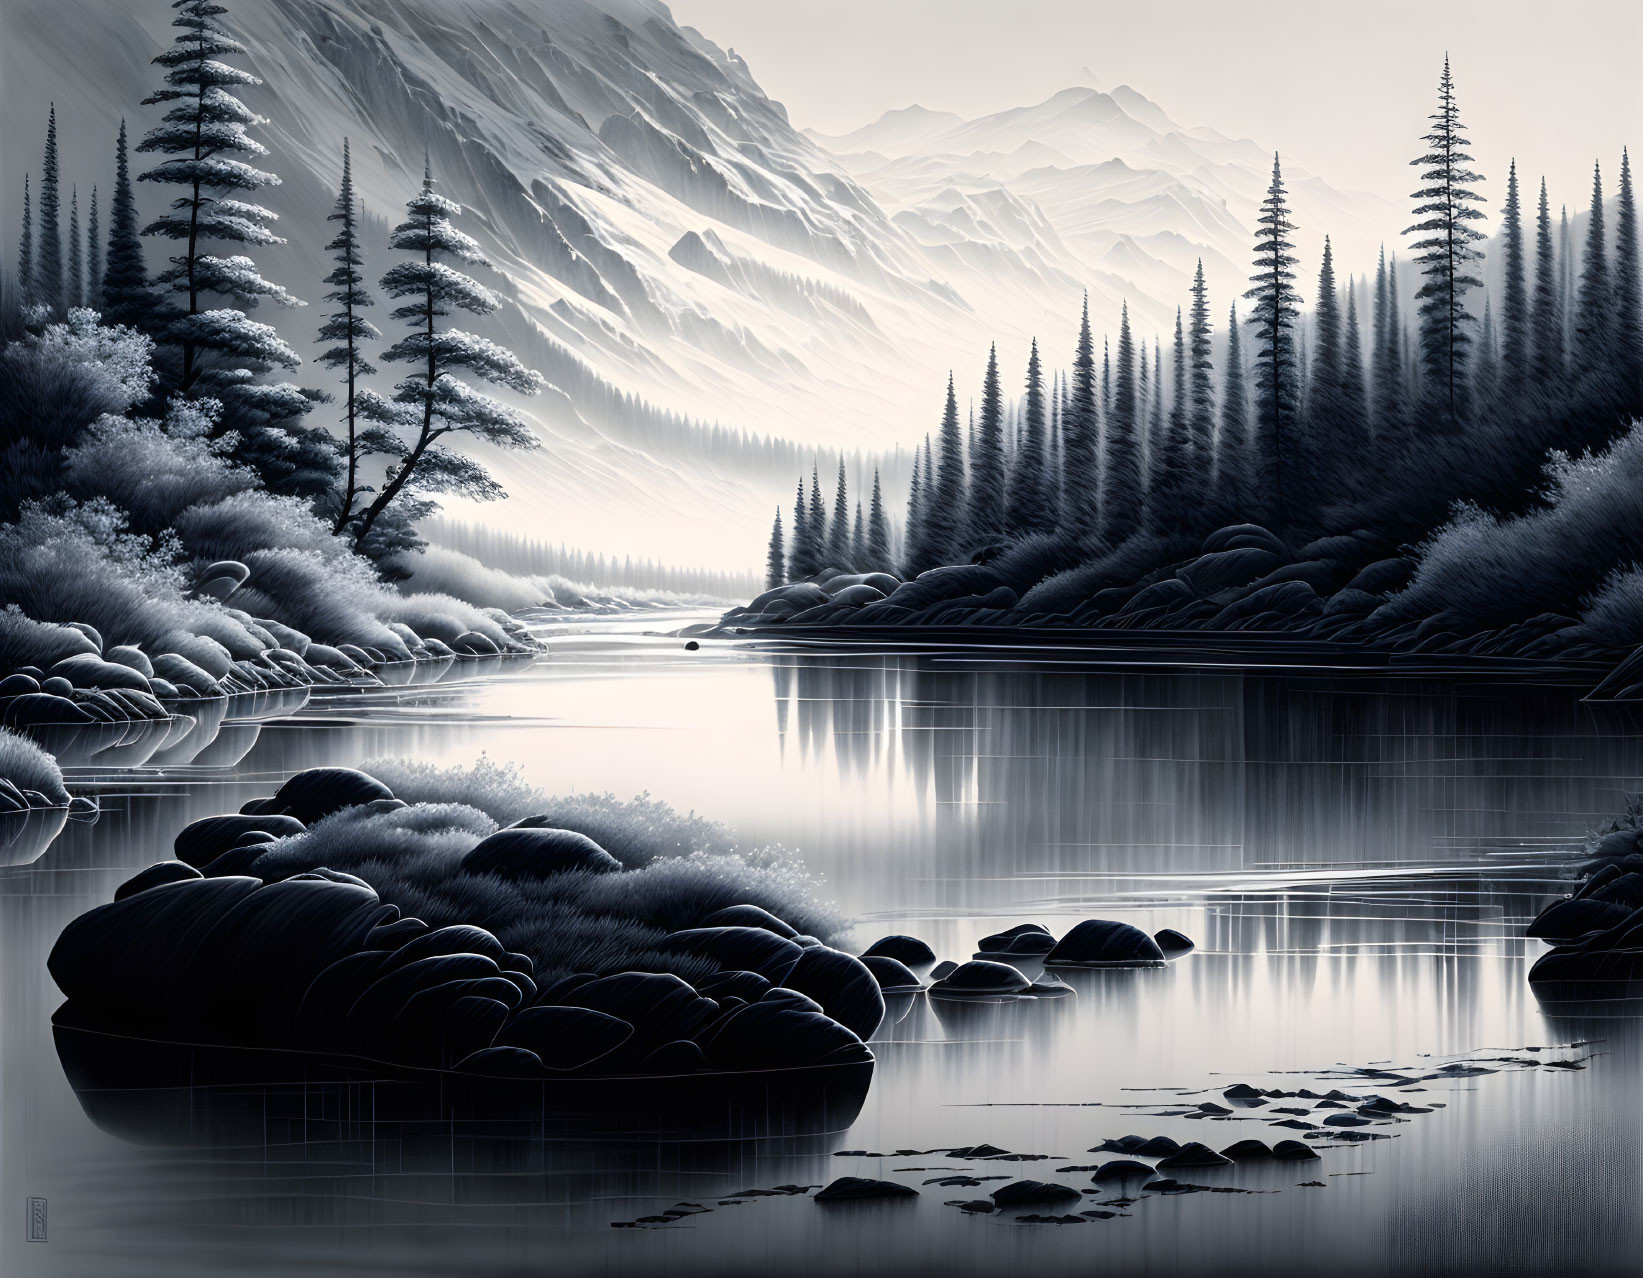 Serene monochromatic landscape with lake, evergreens, and mountains